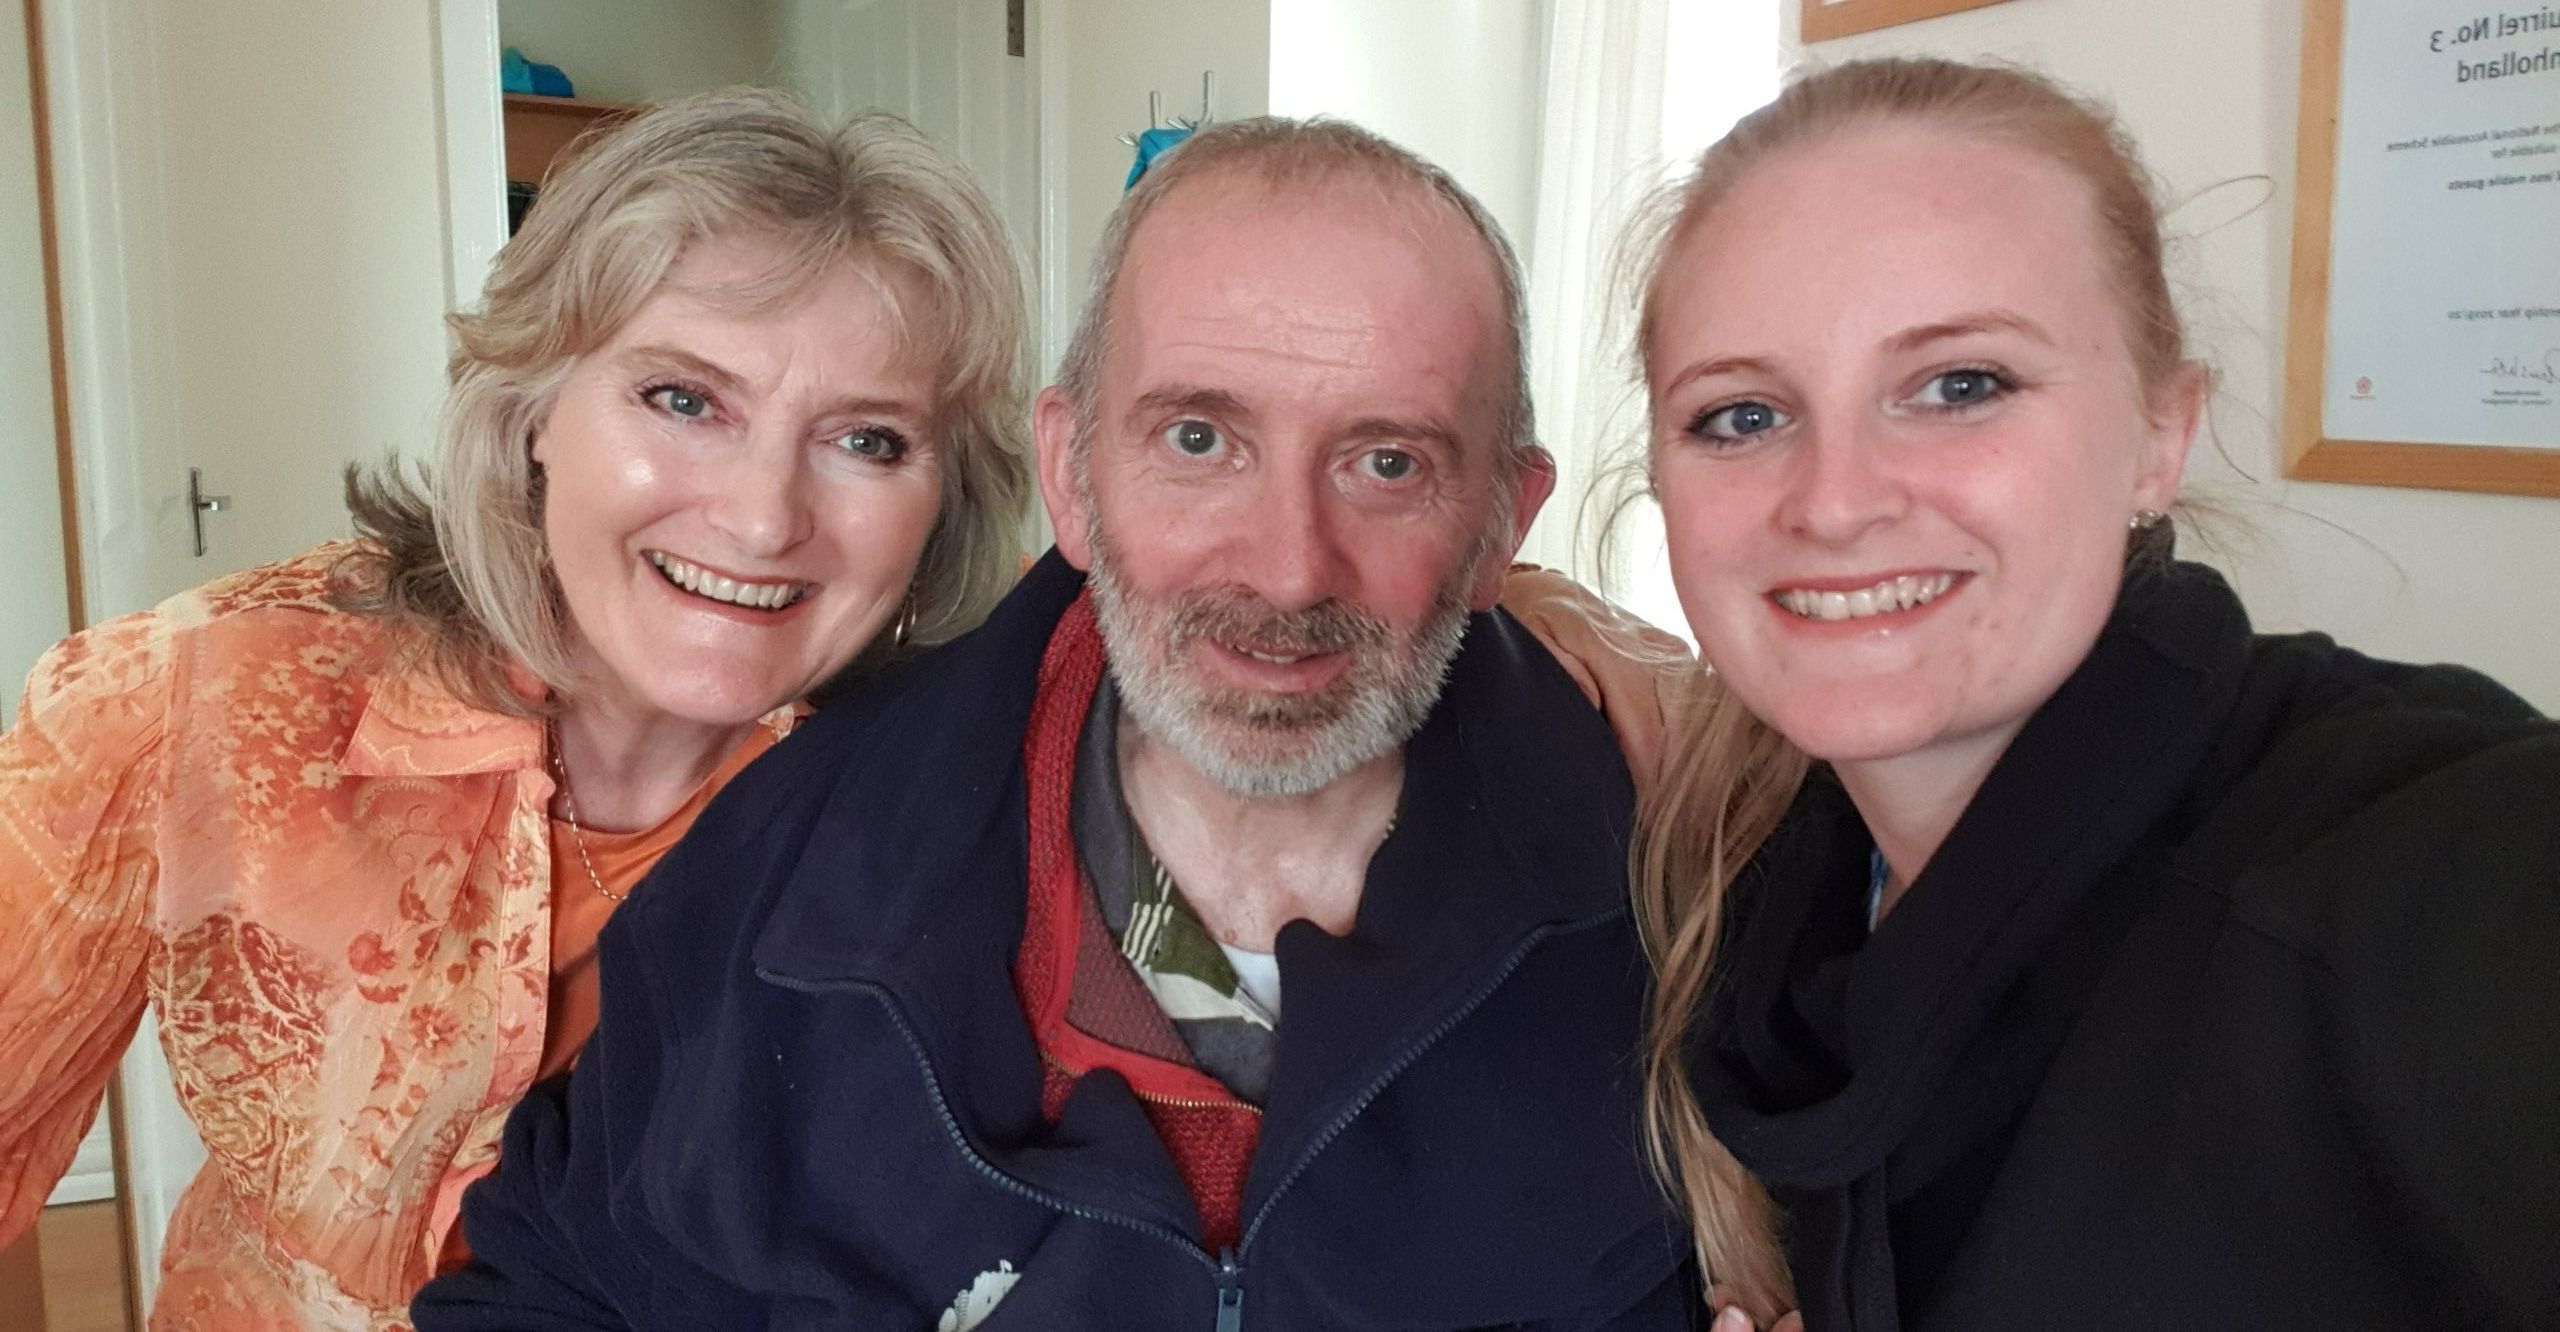 Patient’s family say ‘thank you’ for first-class NHS care